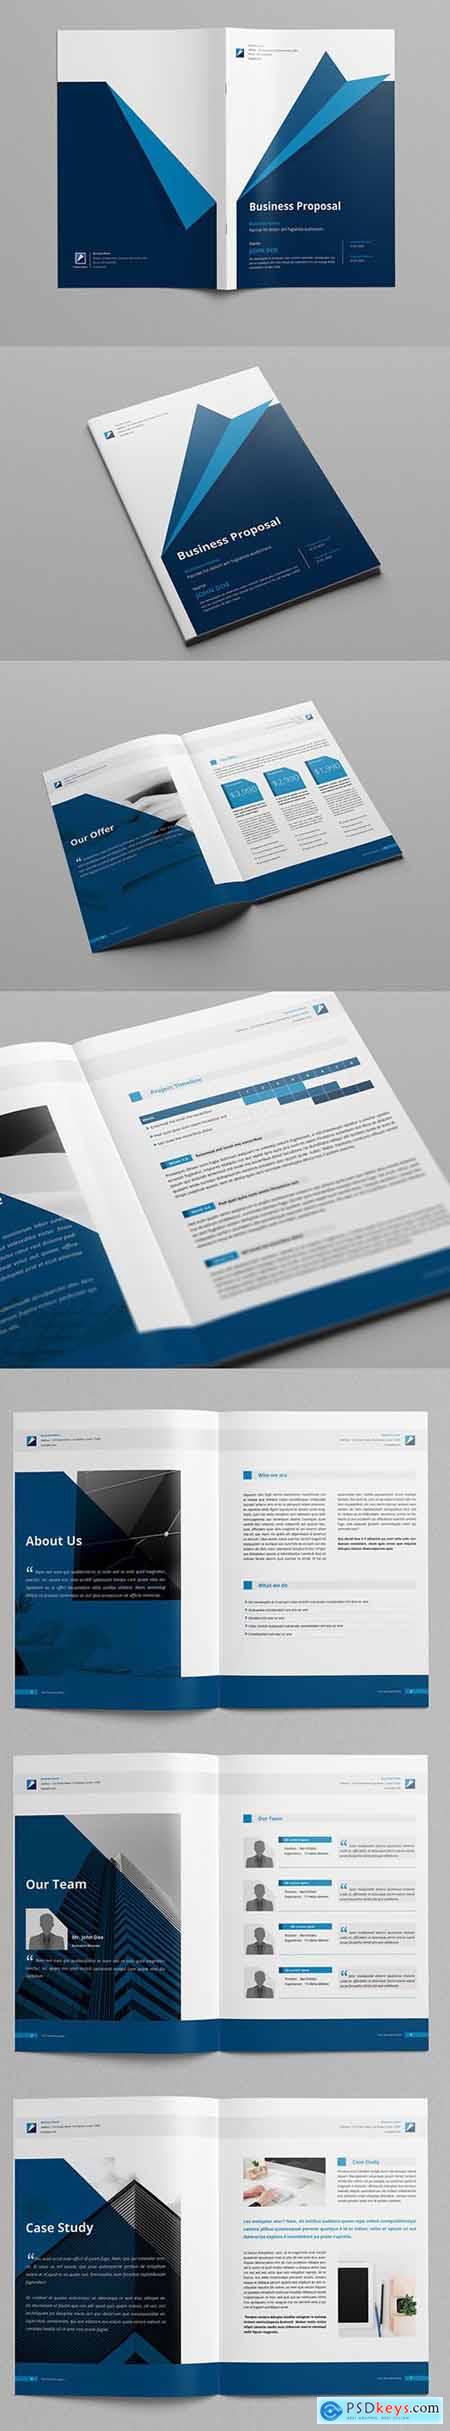 Business Proposal Layout with Blue Accents 220149505